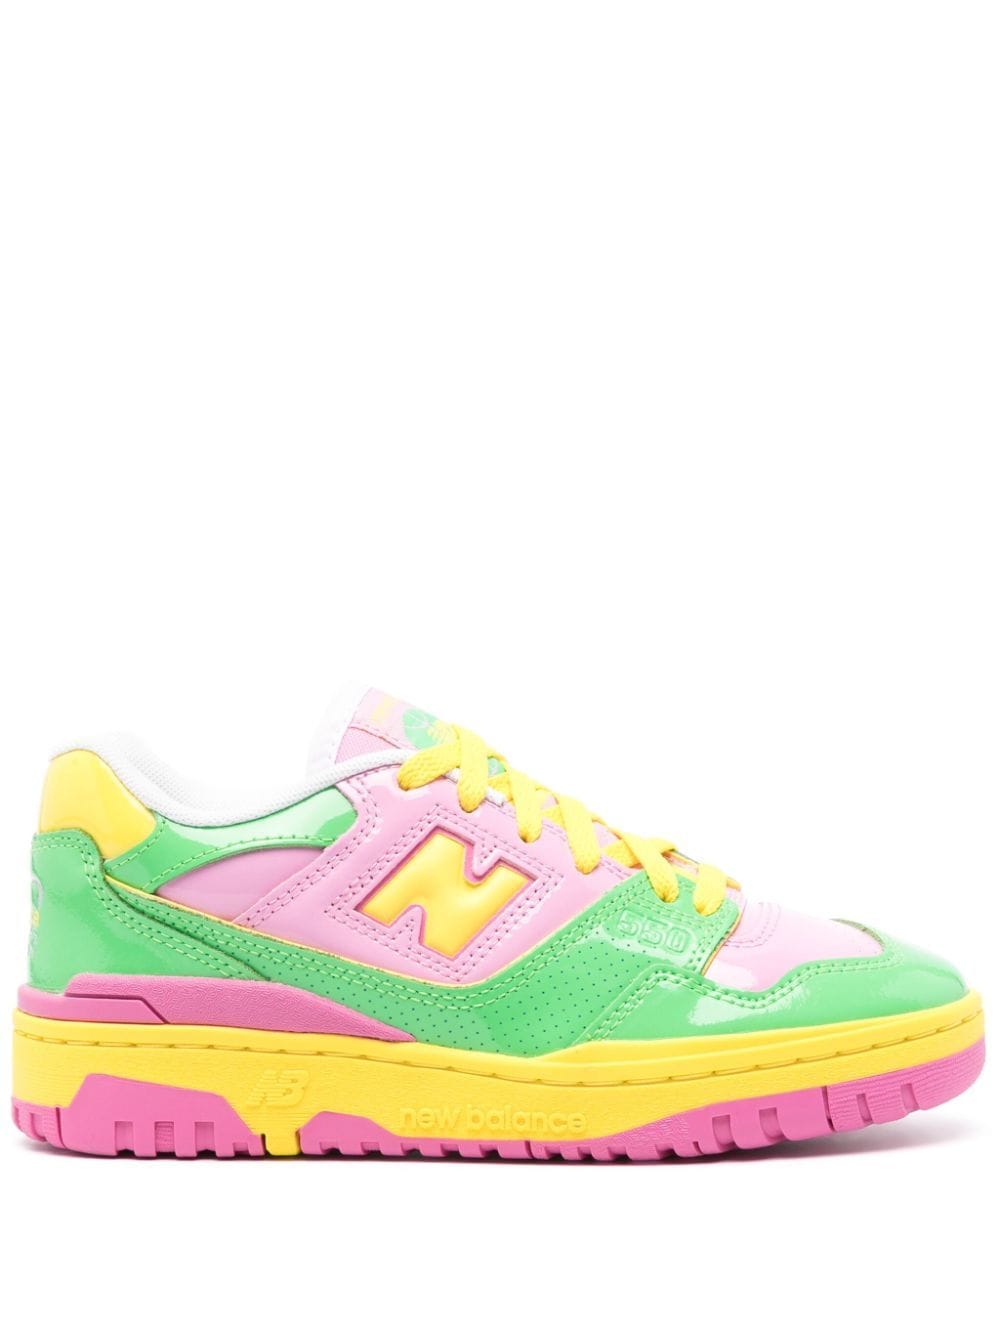 New Balance 550 Contrast Trainers In Pink